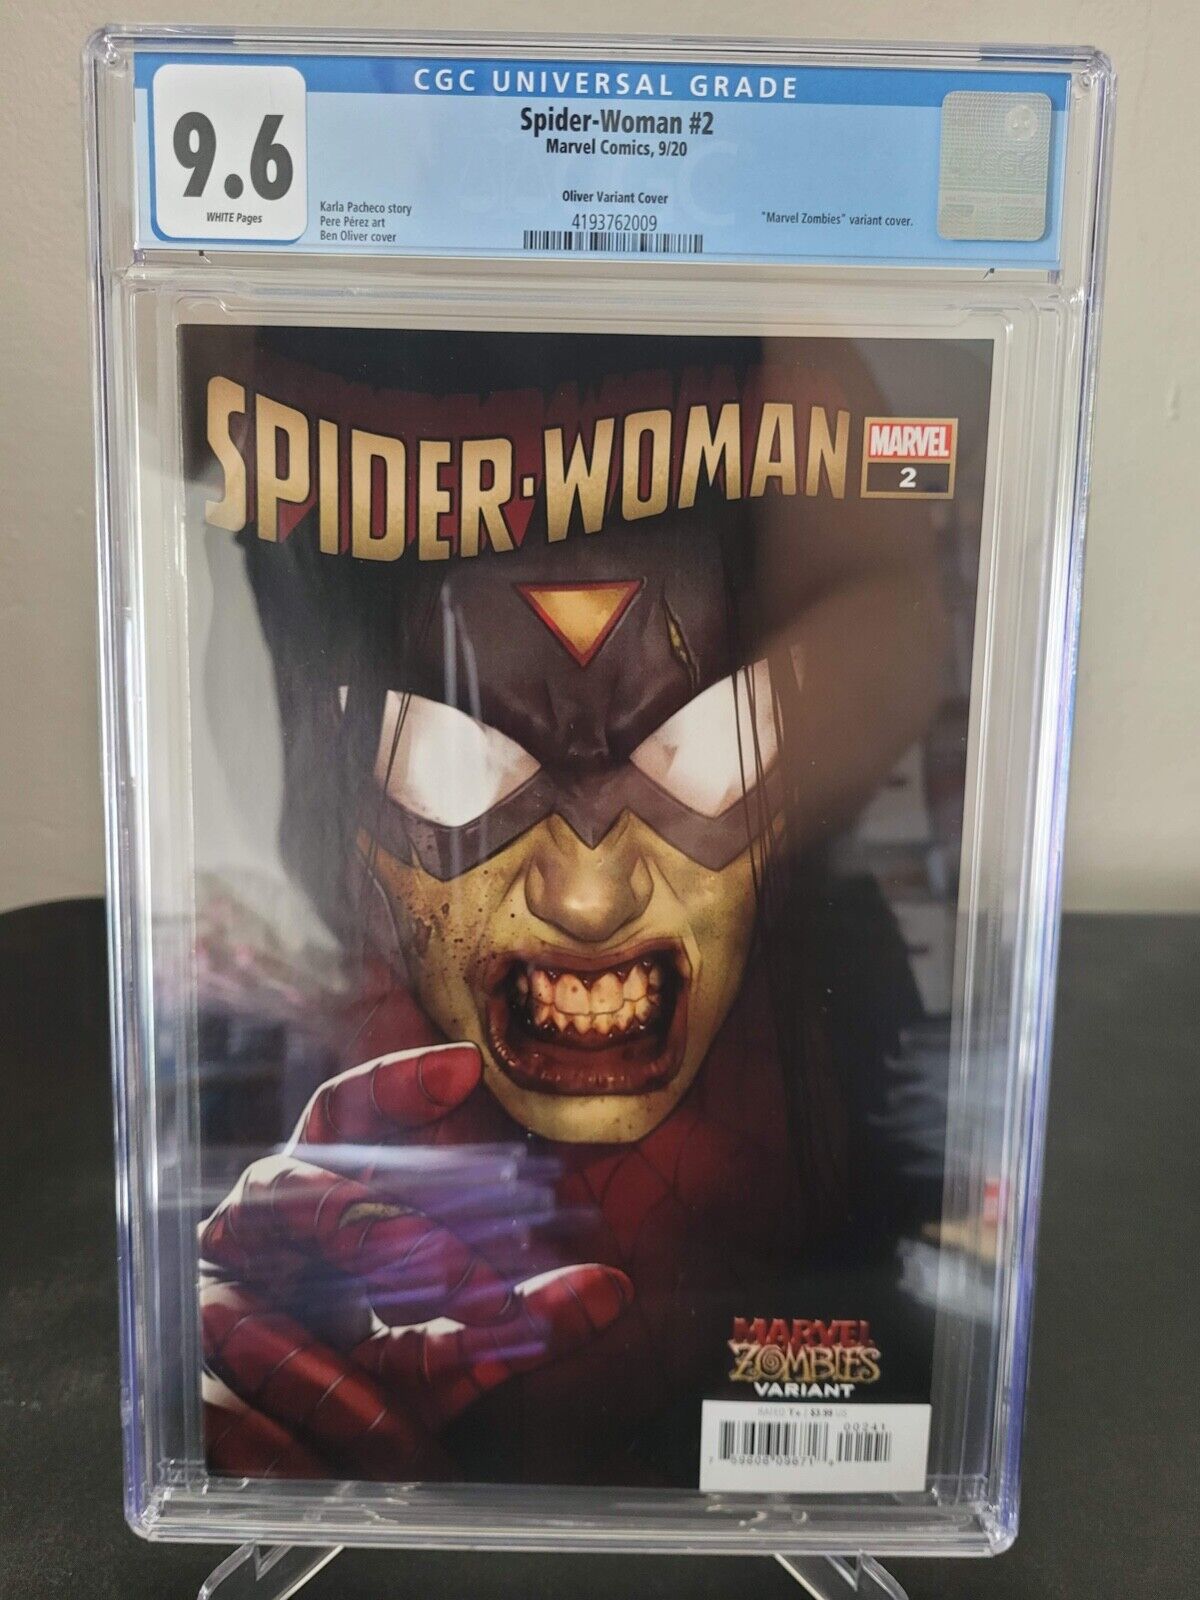 SPIDER-WOMAN #2 CGC 9.6 GRADED MARVEL COMICS 2020 MARVEL ZOMBIES VARIANT COVER